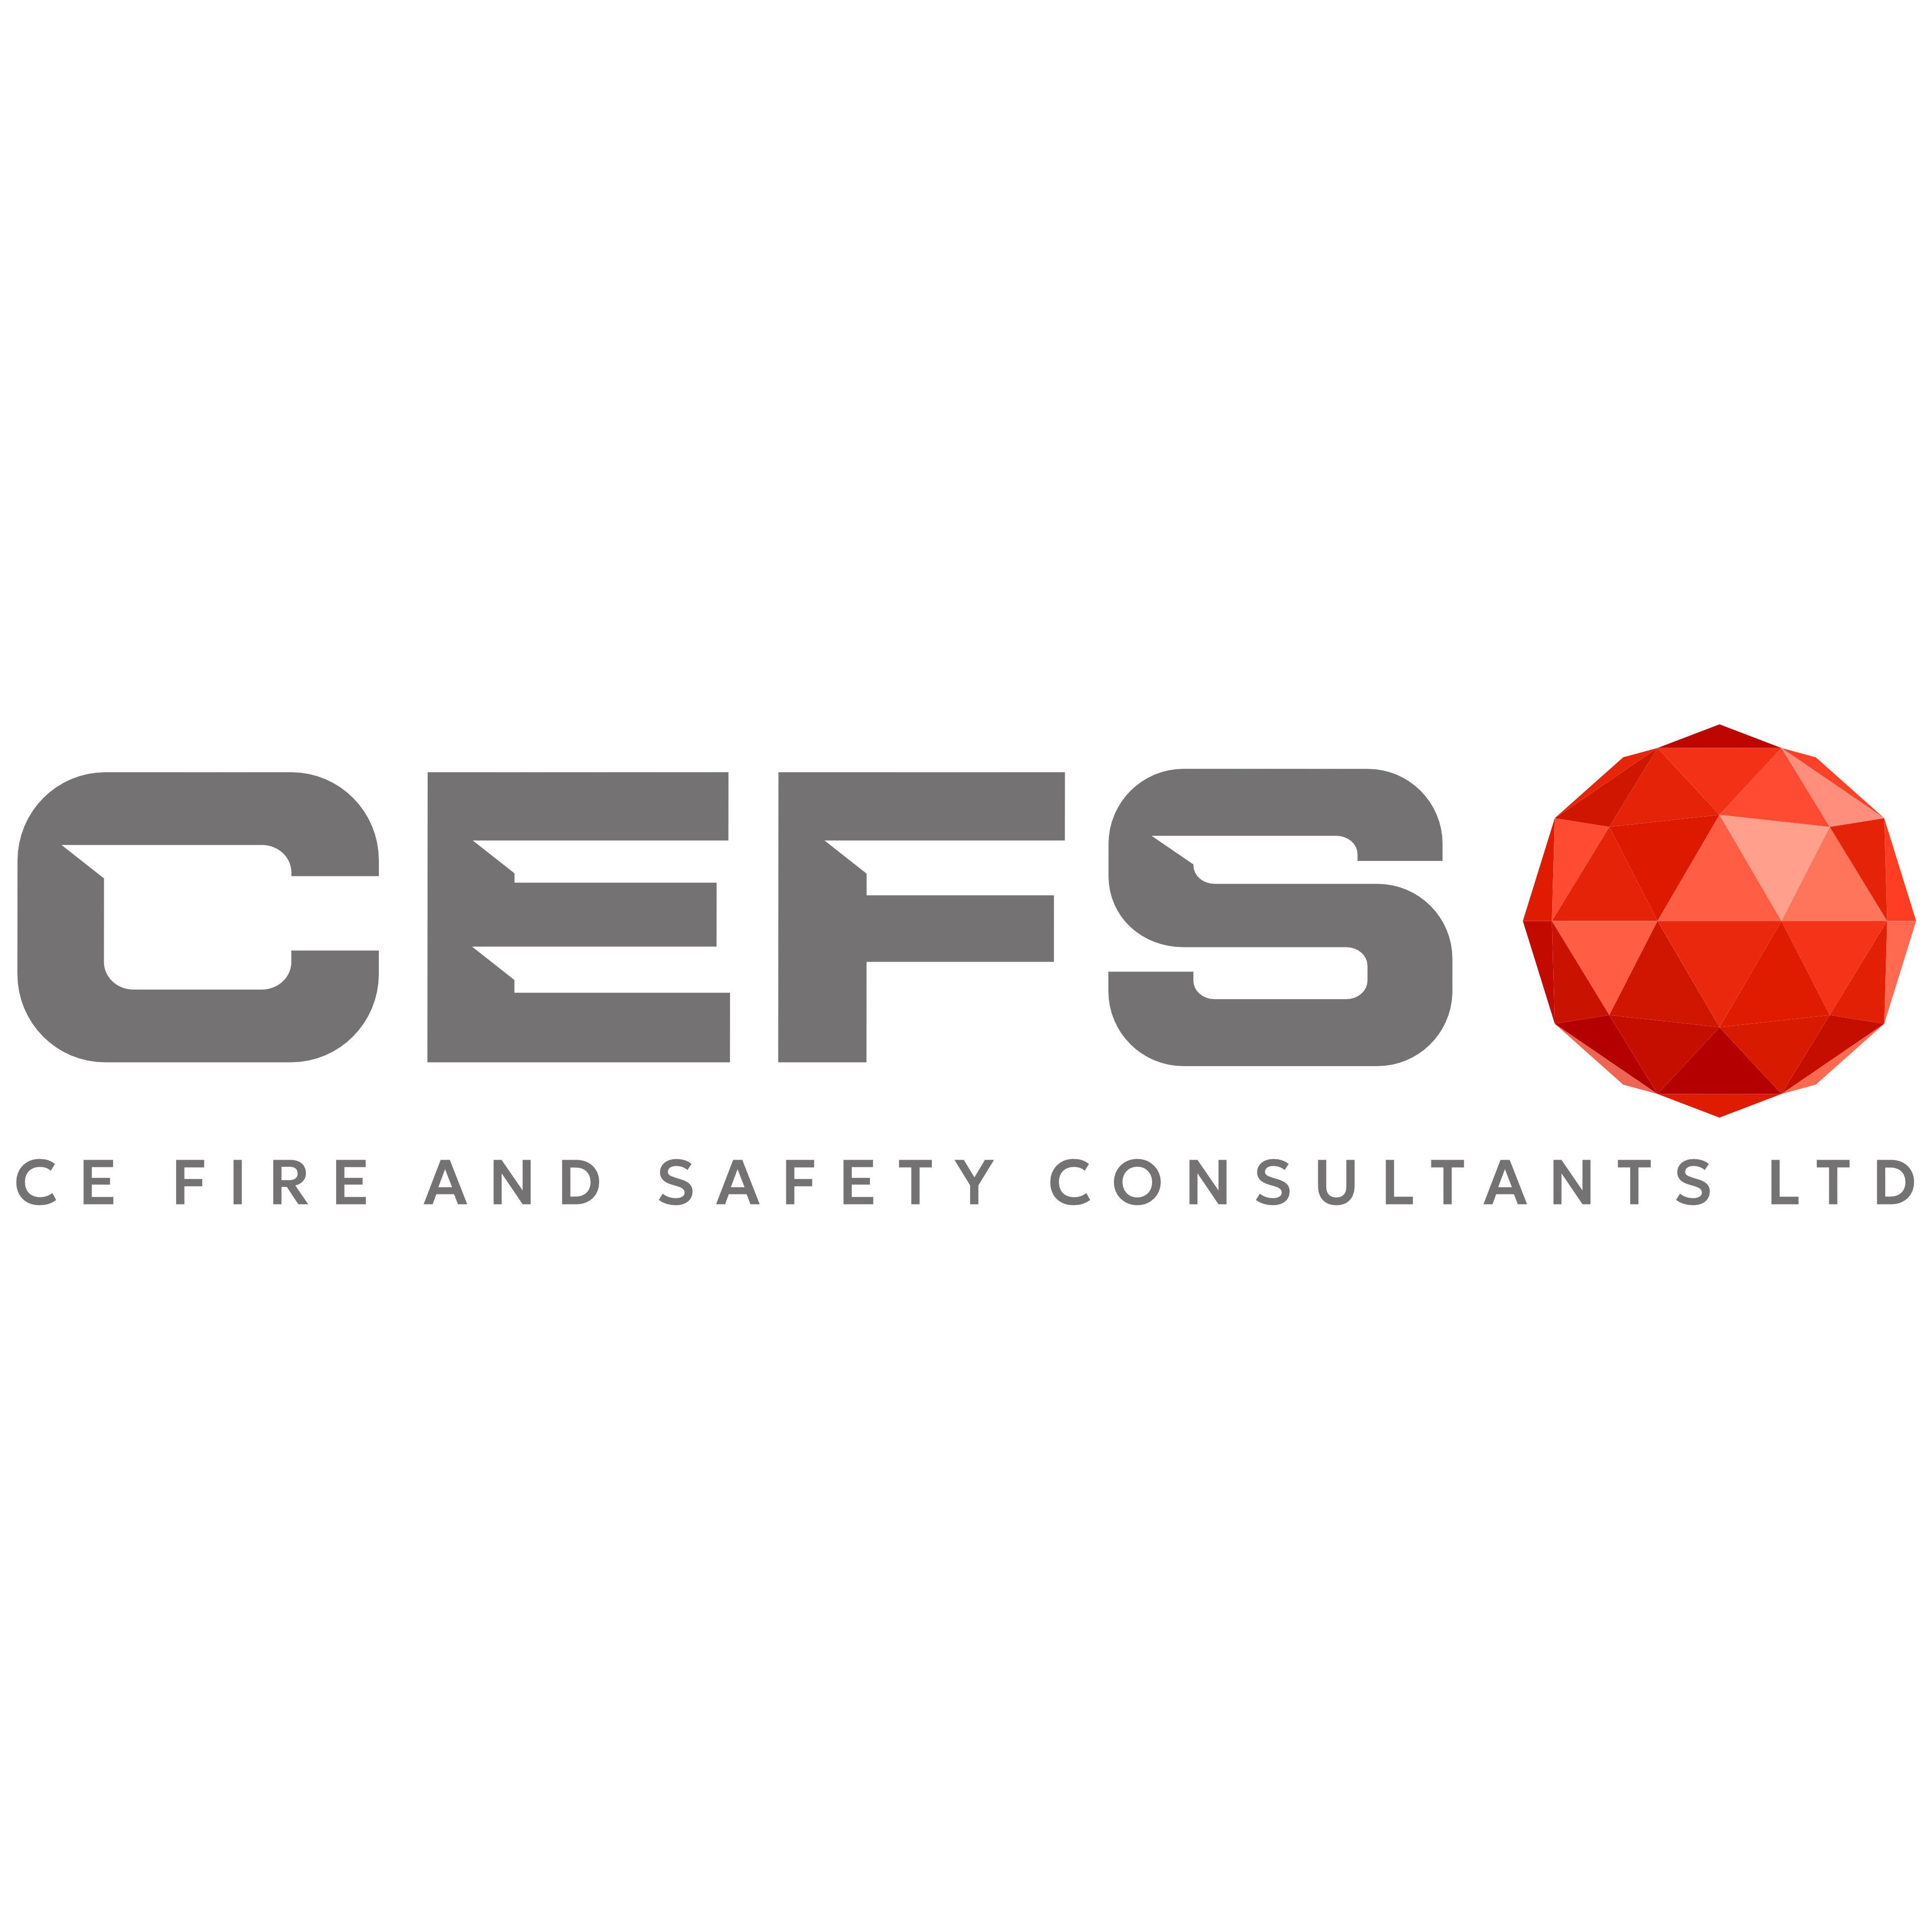 CE Fire And Safety Consultants Limited